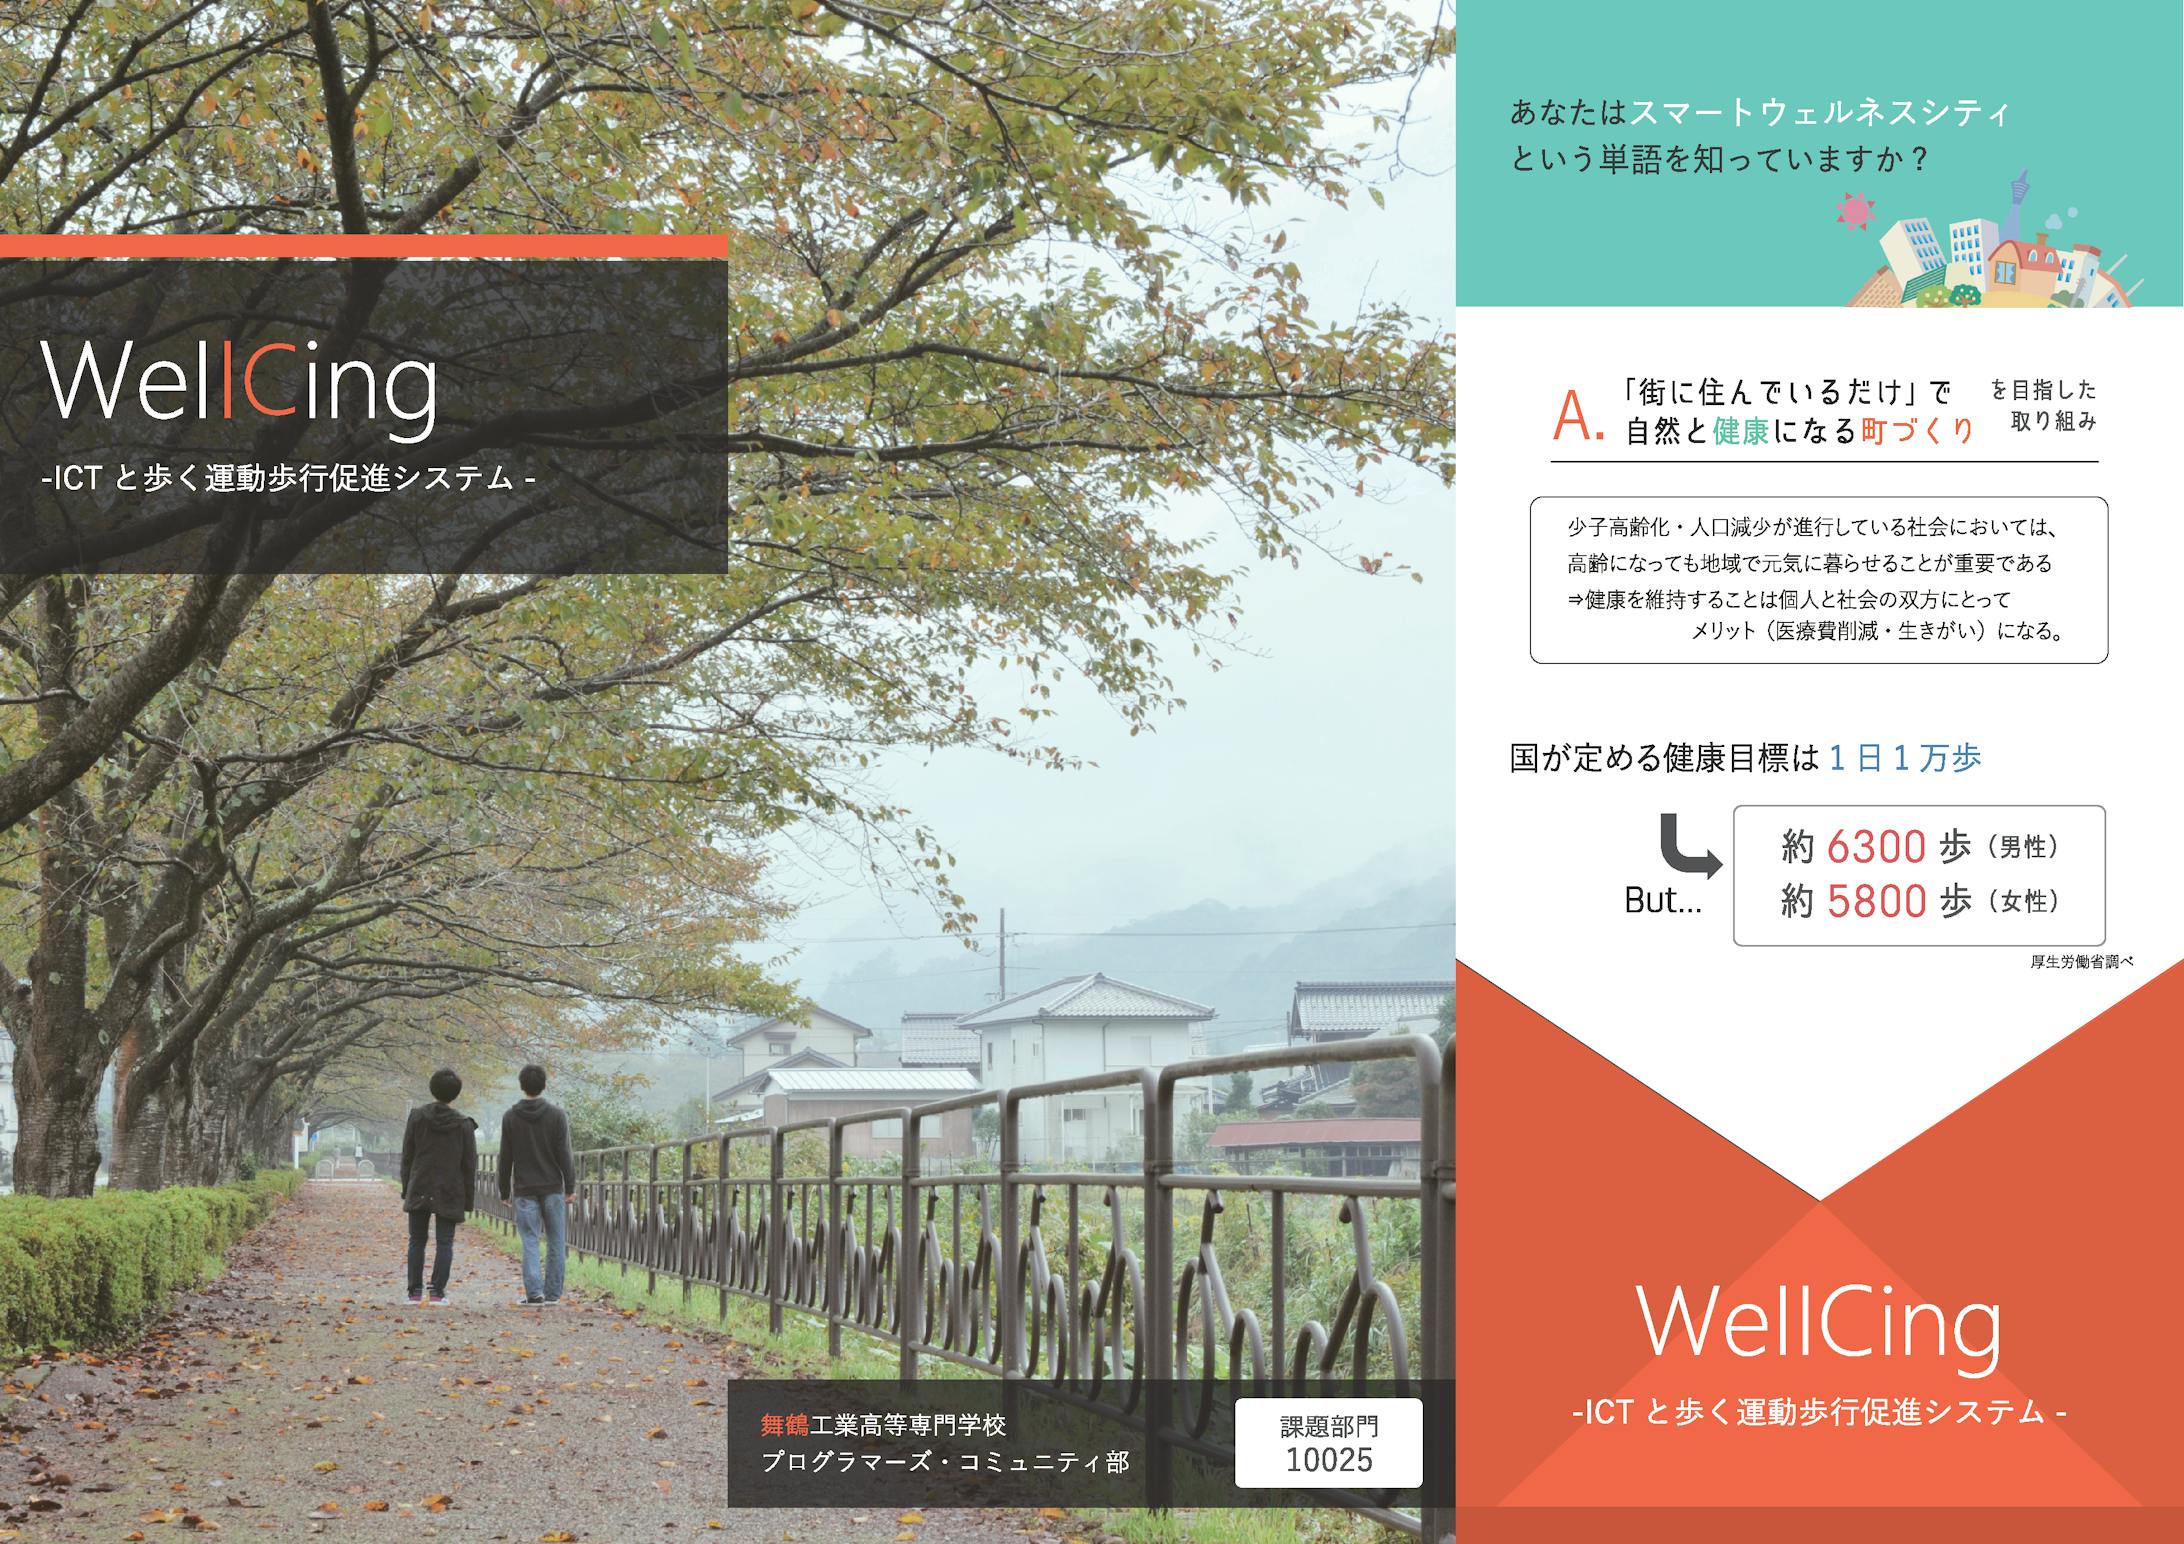 WelICing （NICT賞/協賛企業賞）-4